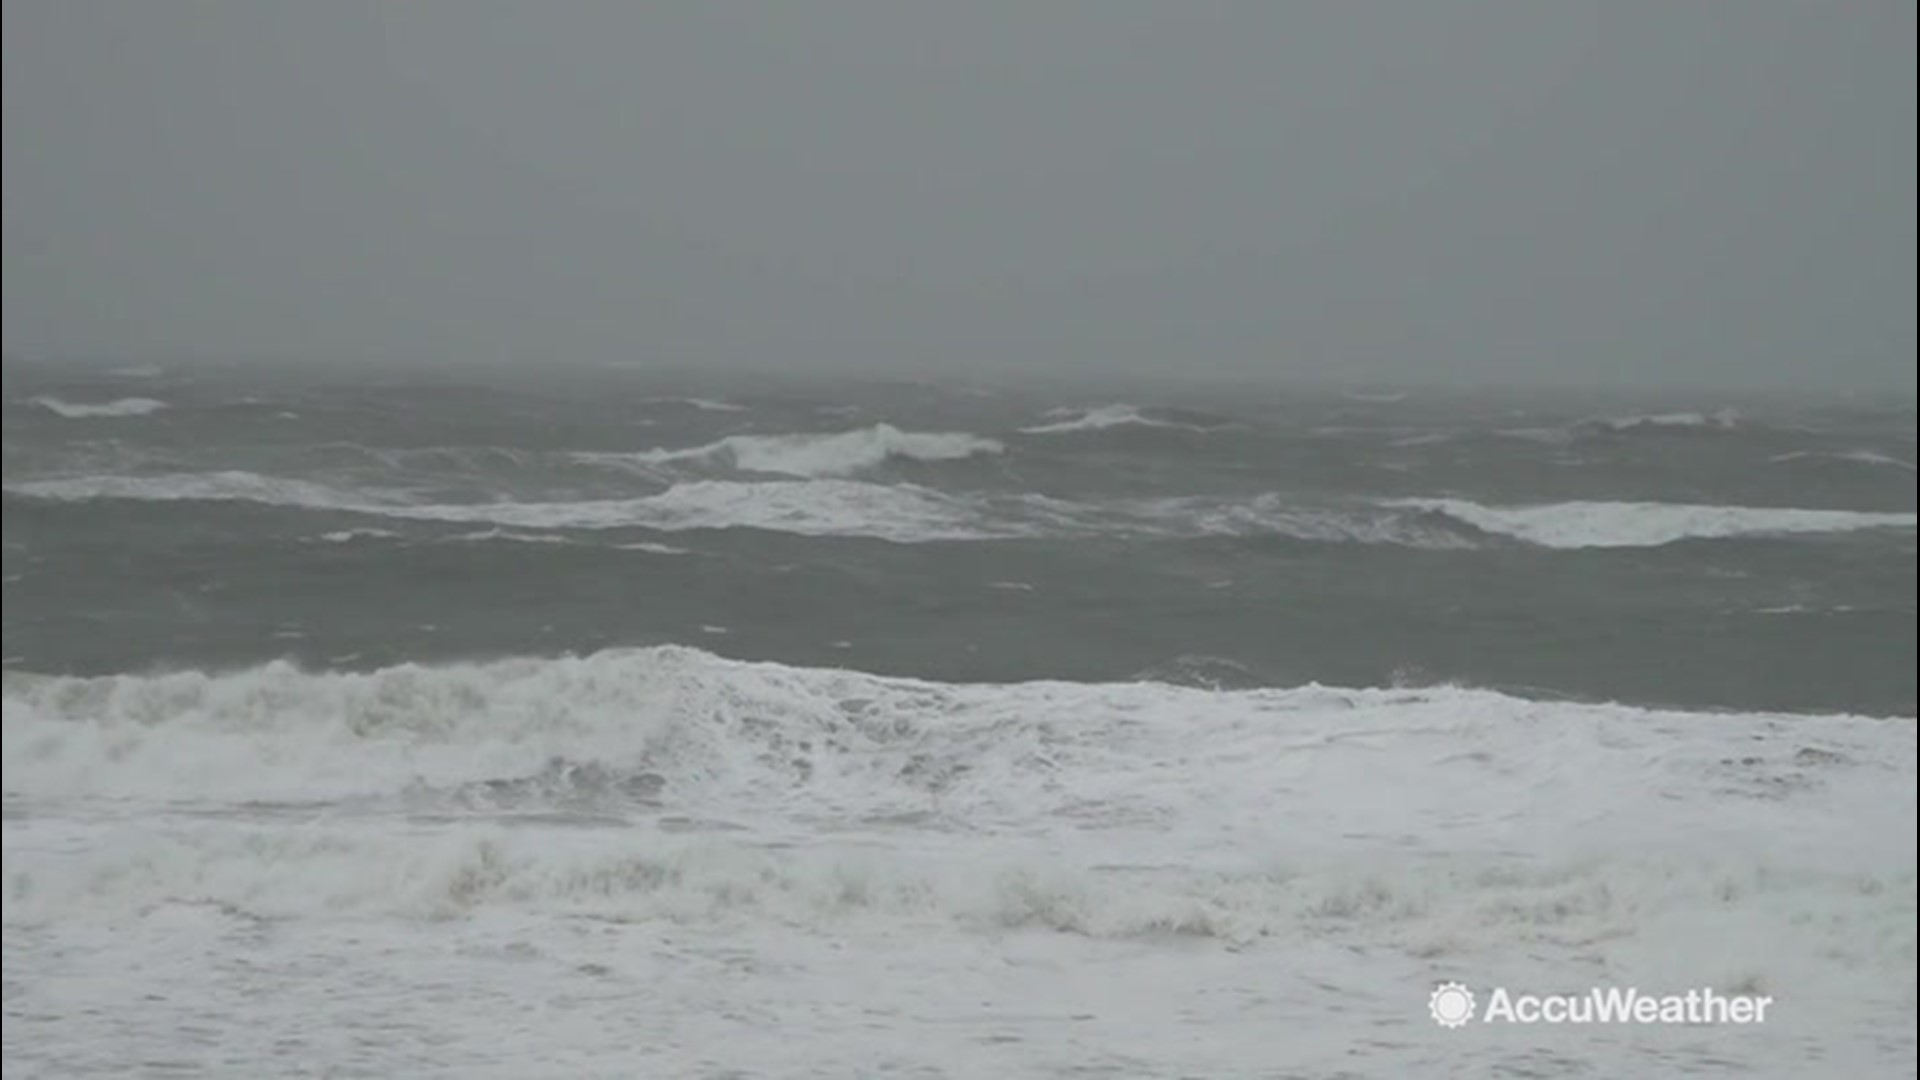 Saturday morning video from Bruxton, North Carolina. You can see in the video the intensifying waves, dune erosion and increasingly intensifying winds.